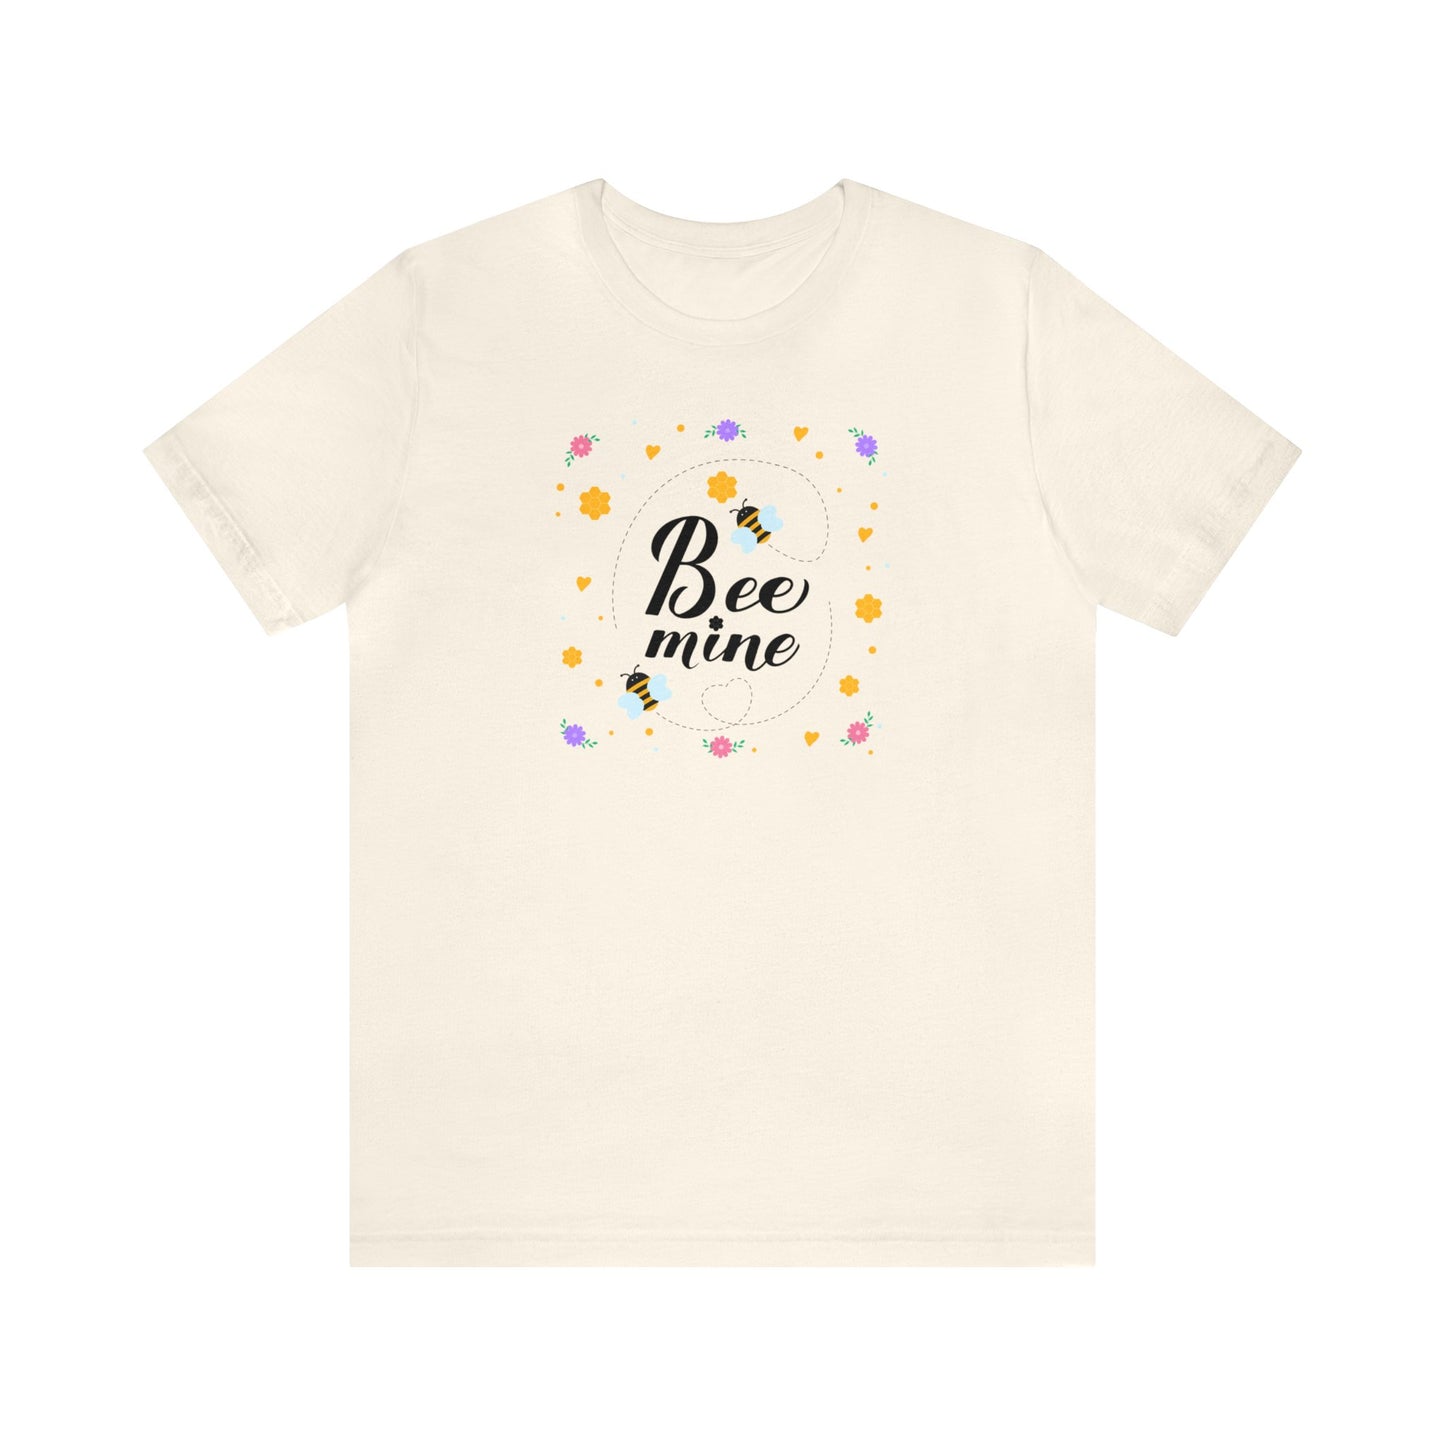 Bee Mine, Valentine's Day Shirt, Bella and Canvas T-shirt